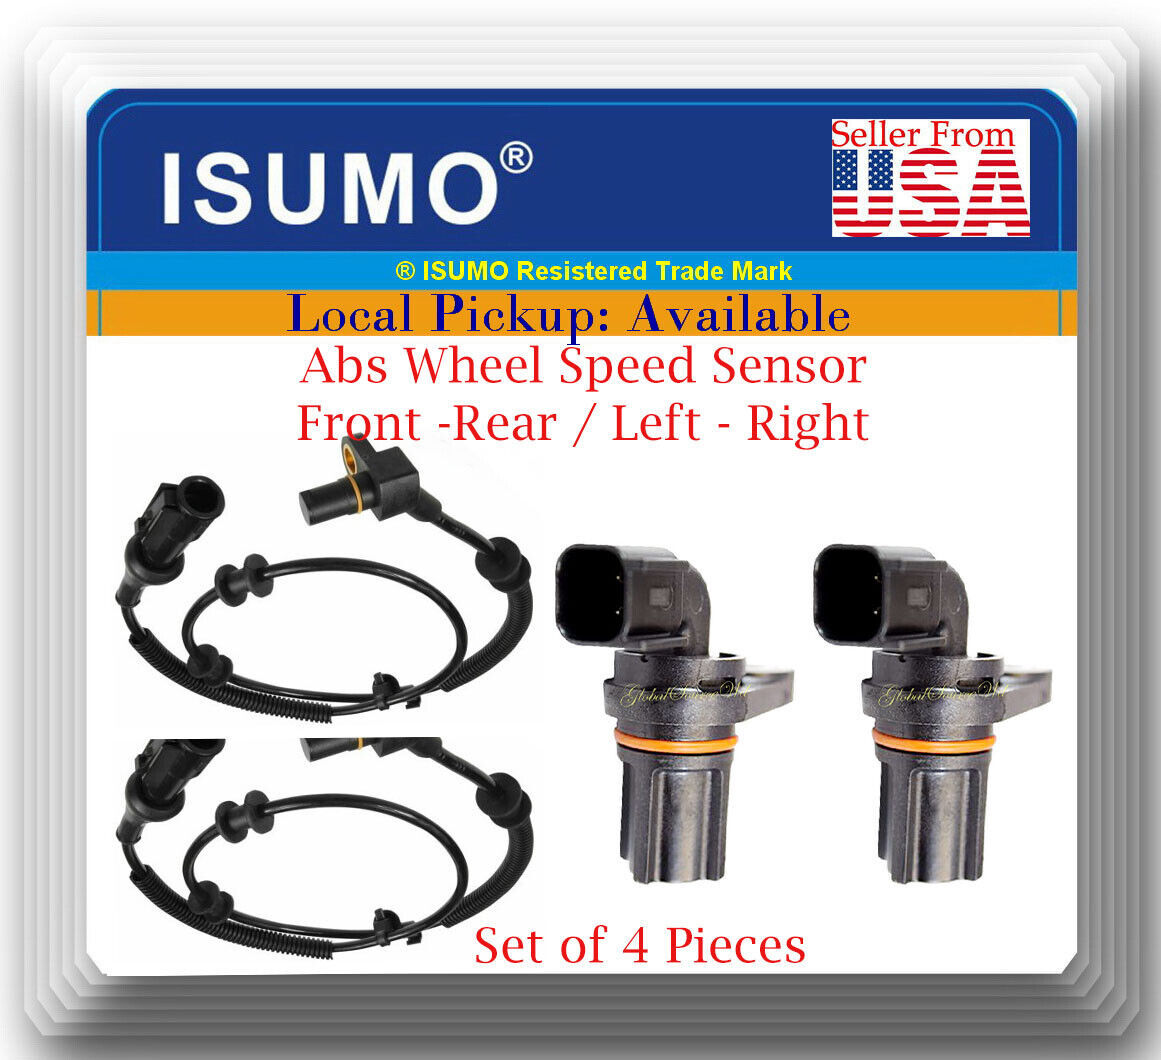 Primary image for 4 ABS Wheel Speed Sensor Front-Rear Left/Right Fits F150 MARK LT 2005-2008 W/4WD